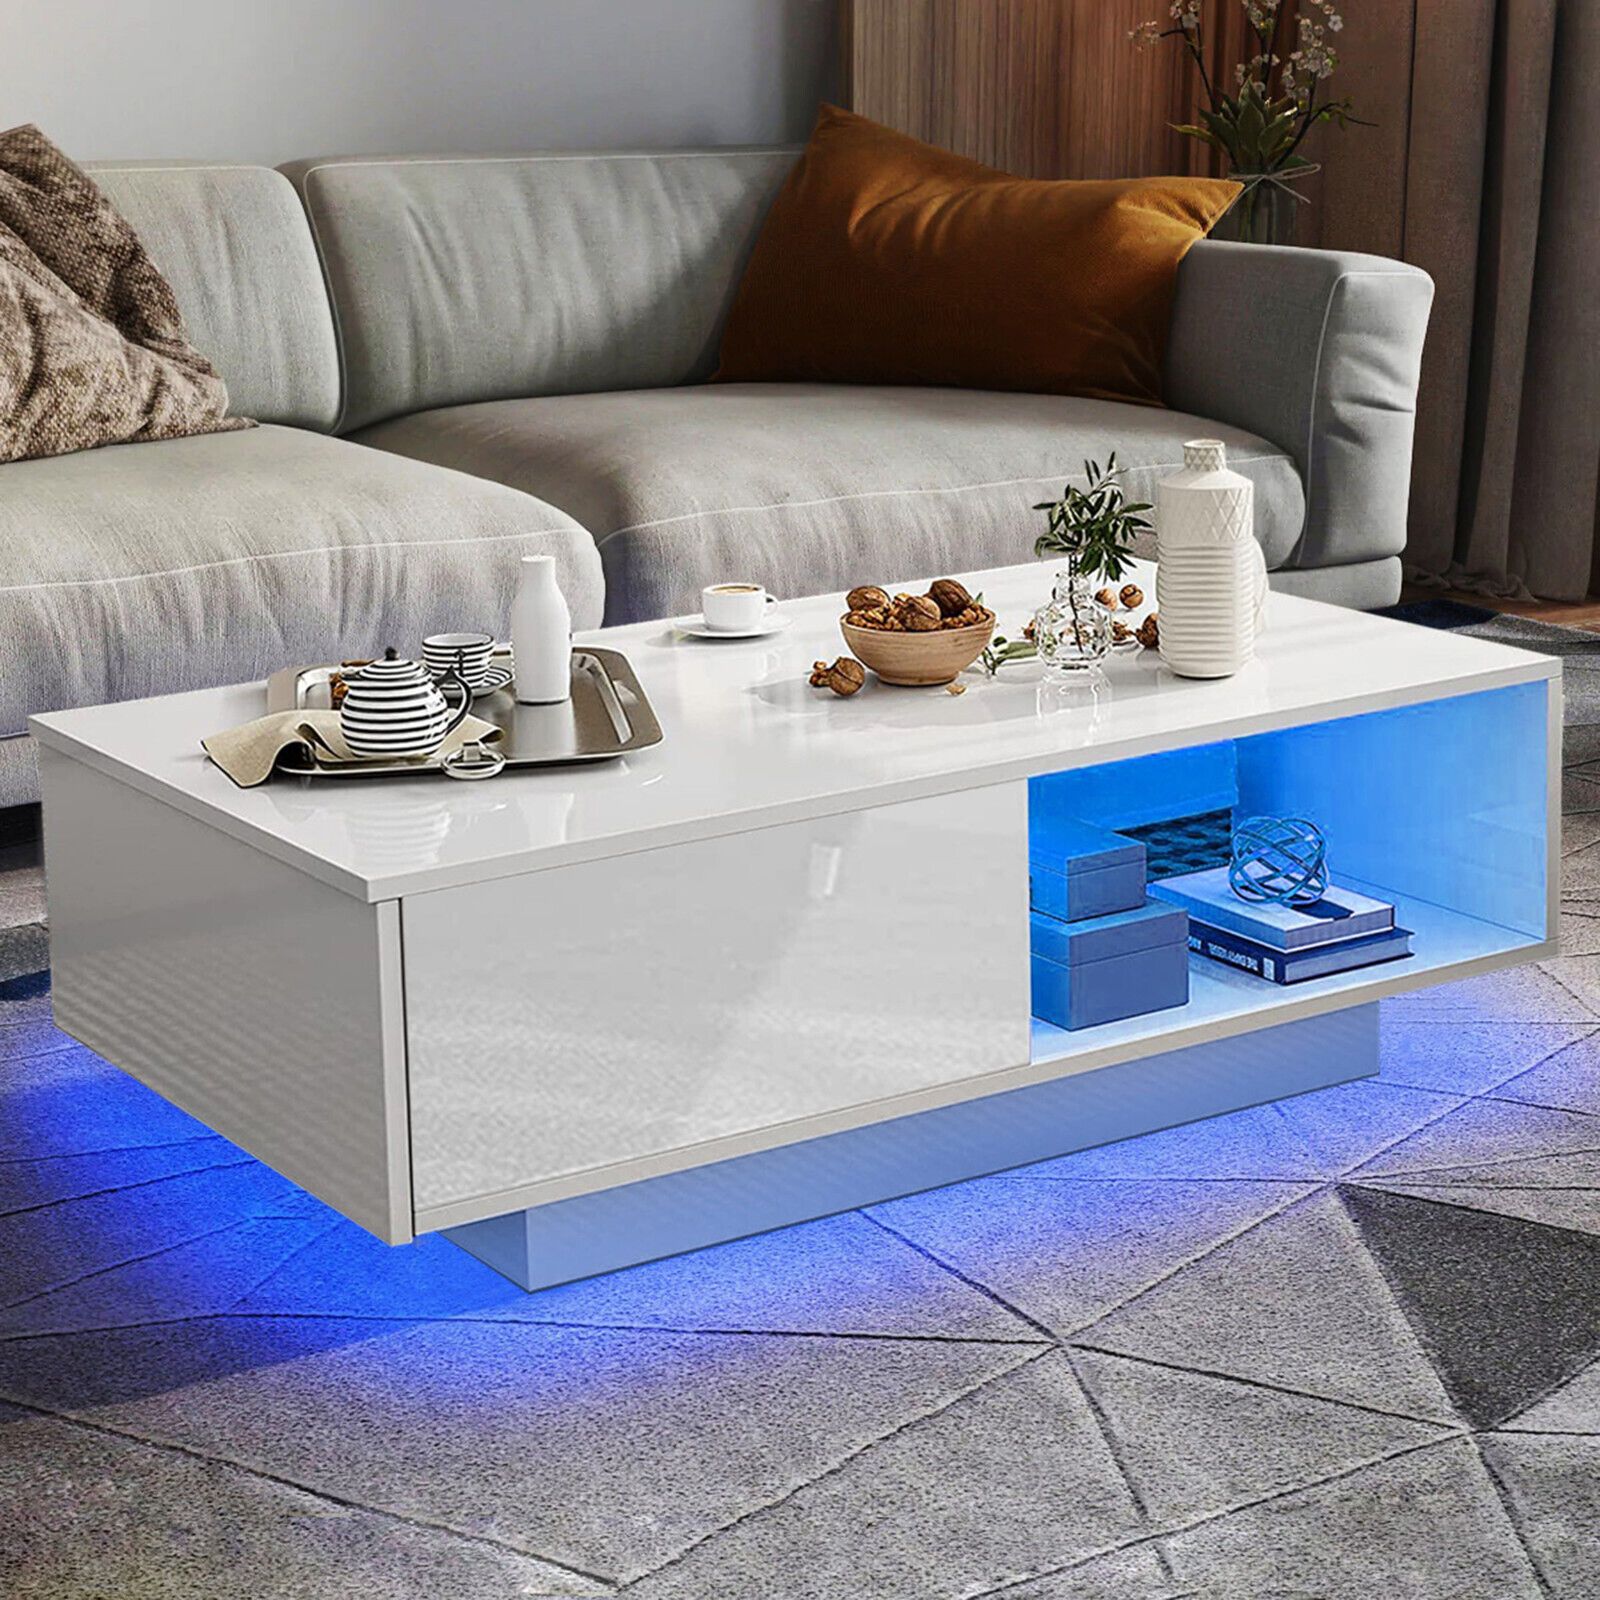 High Gloss Coffee Table With Storage Drawers Rgb Led Modern Living Room  Wooden | Ebay With Regard To High Gloss Coffee Tables (View 18 of 20)